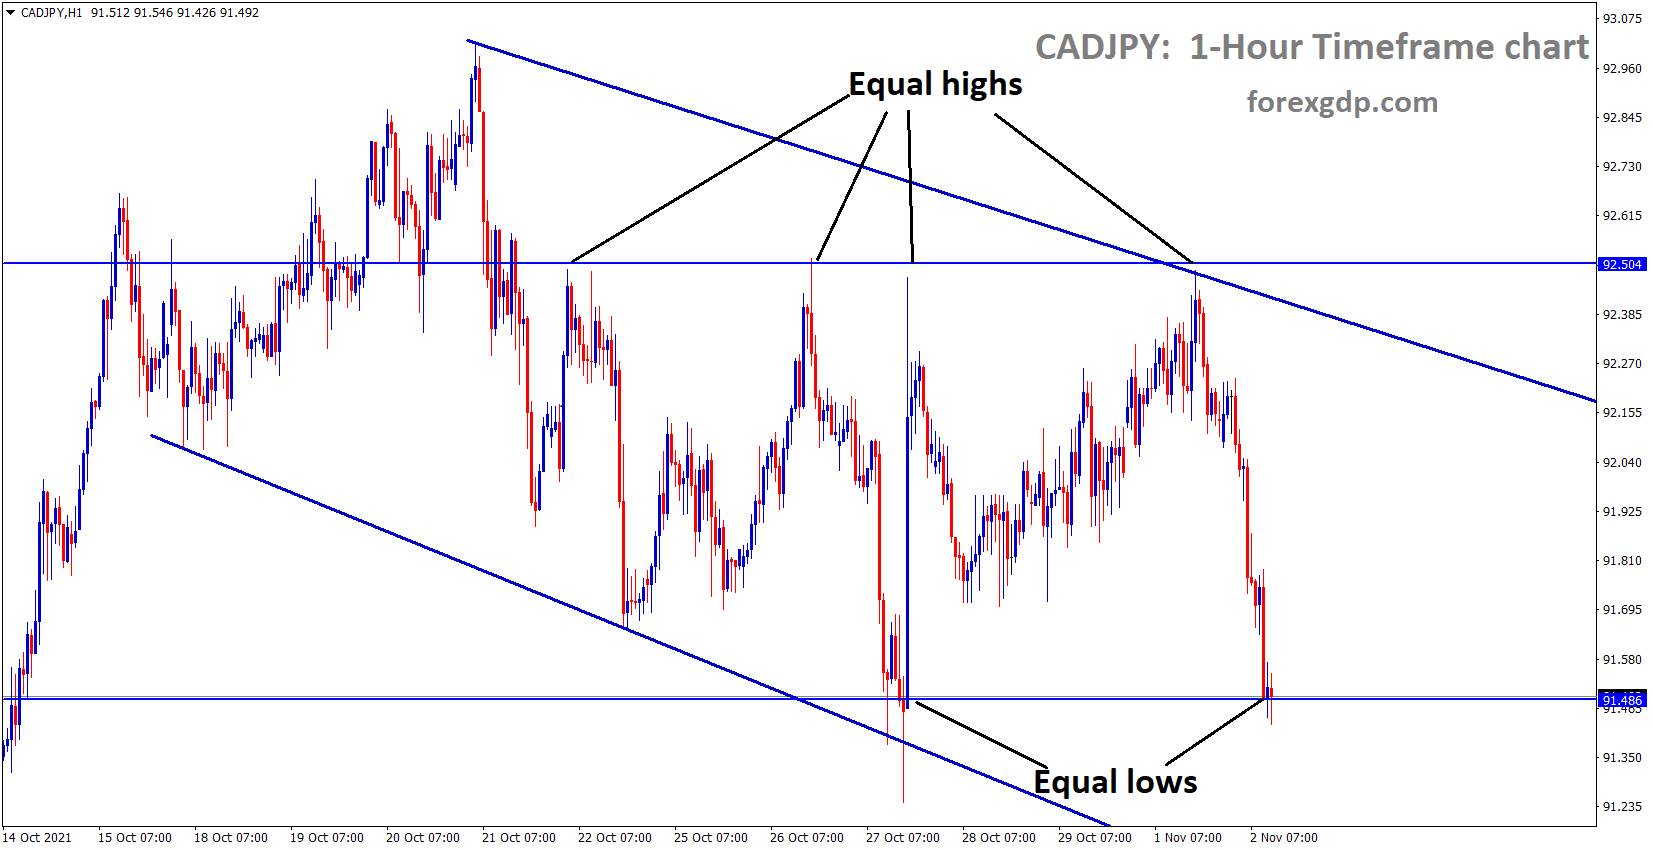 CADJPY is Moving in the Descending channel and fell from the lower high area of the channel market standing at consolidation range between Equal lows and Equal highs area.